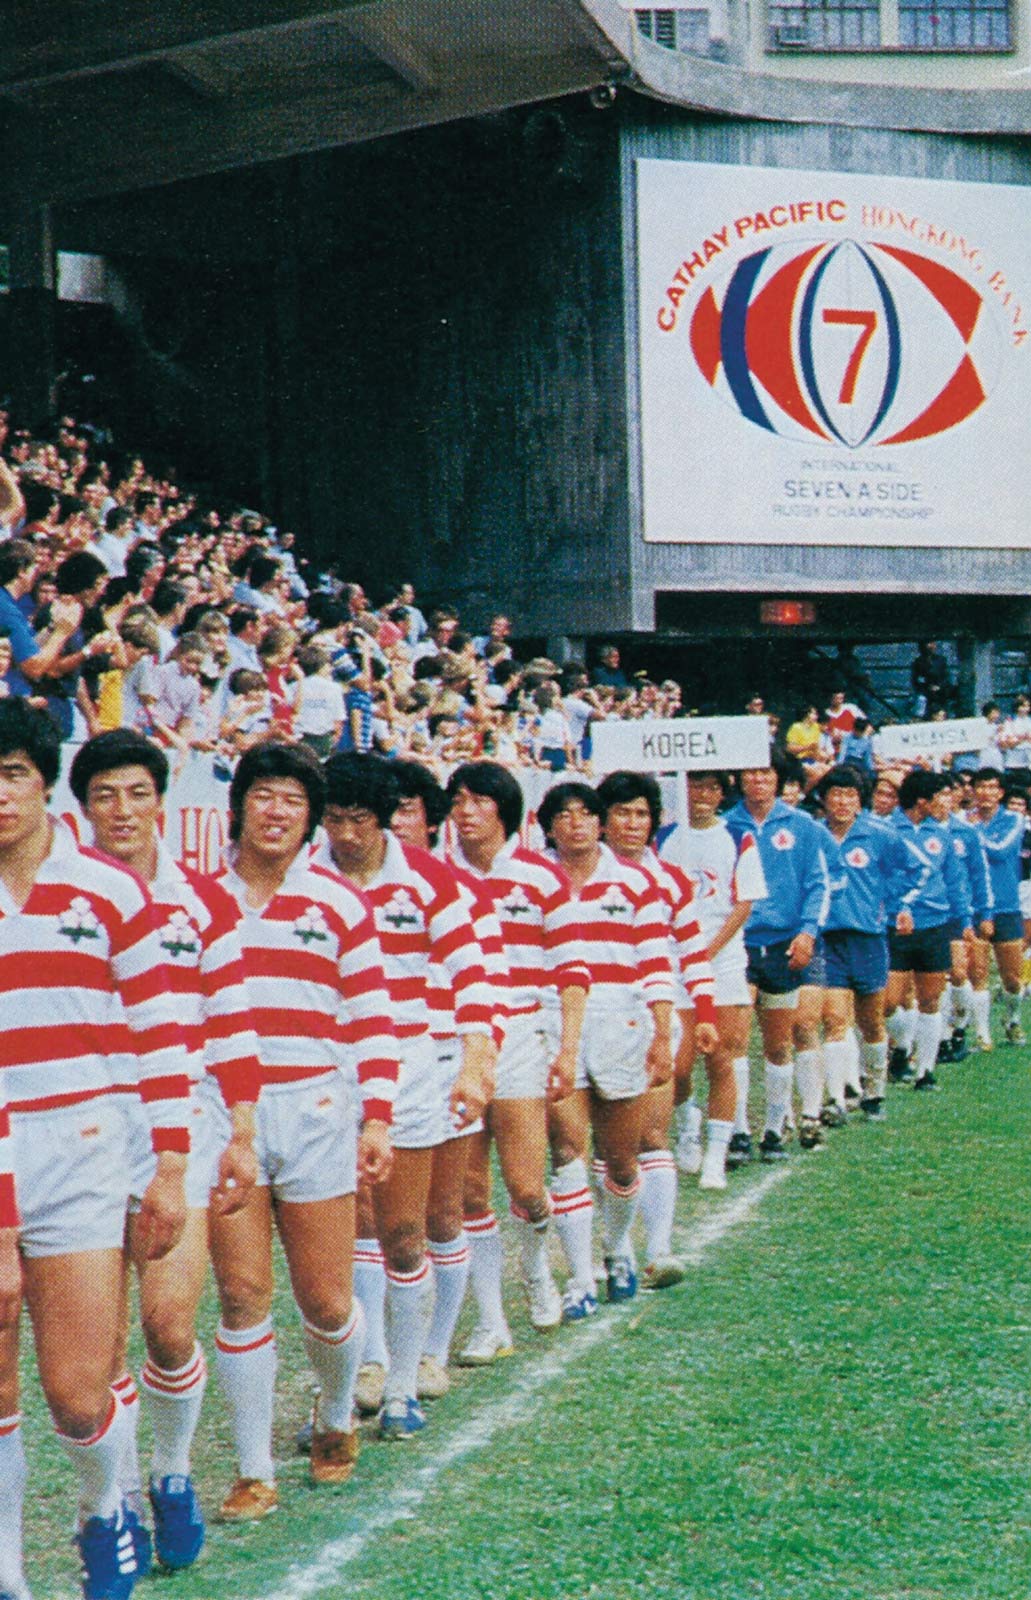 The first Hong Kong International Rugby Sevens was held in 1976